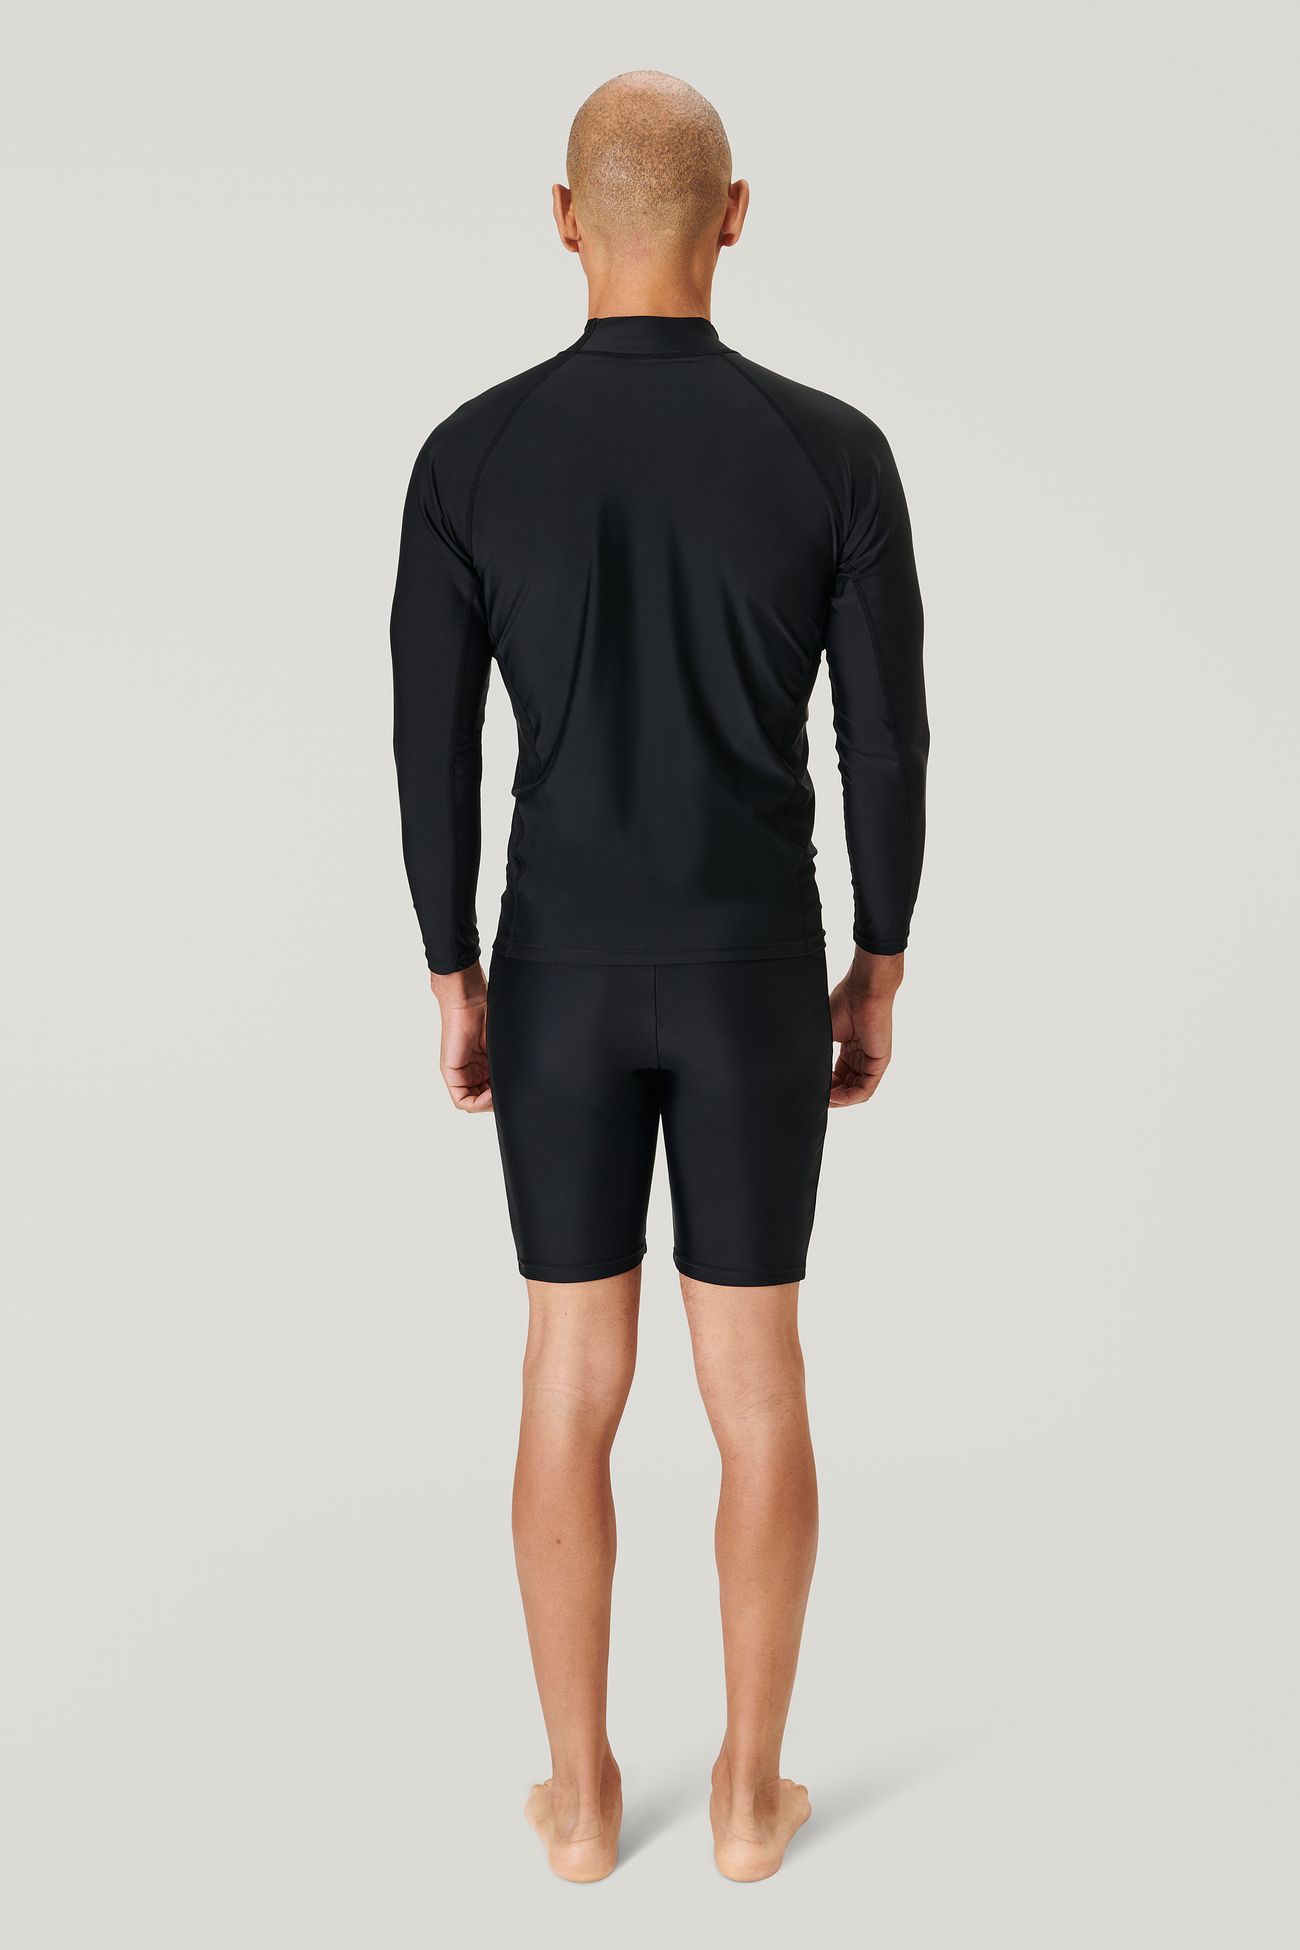 Download 41+ Mens Full Wetsuit Mockup Front View Background ...